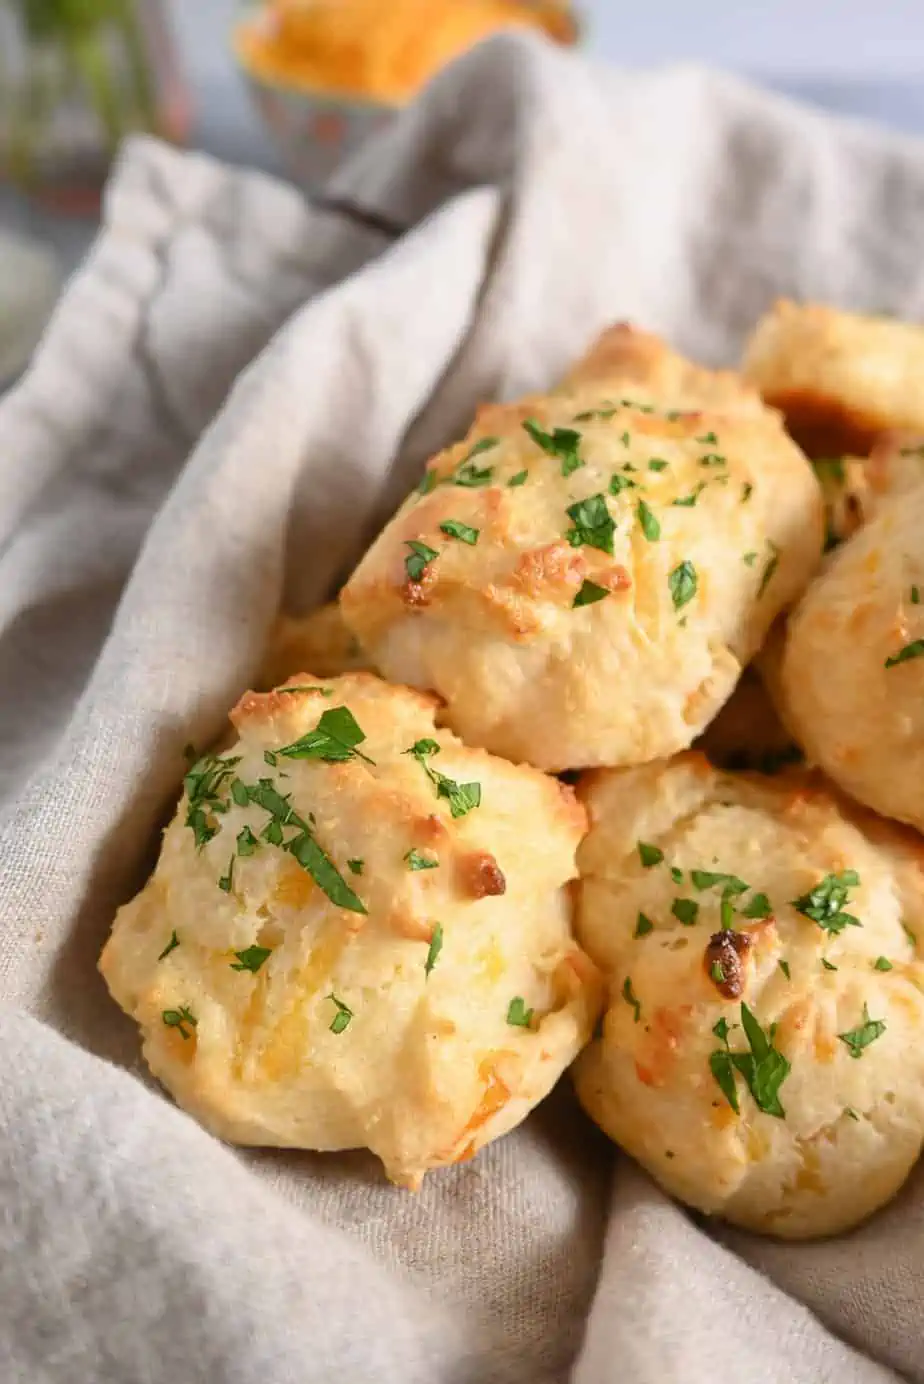 https://www.stephiecooks.com/wp-content/uploads/2013/06/close-up-red-lobster-biscuits.webp